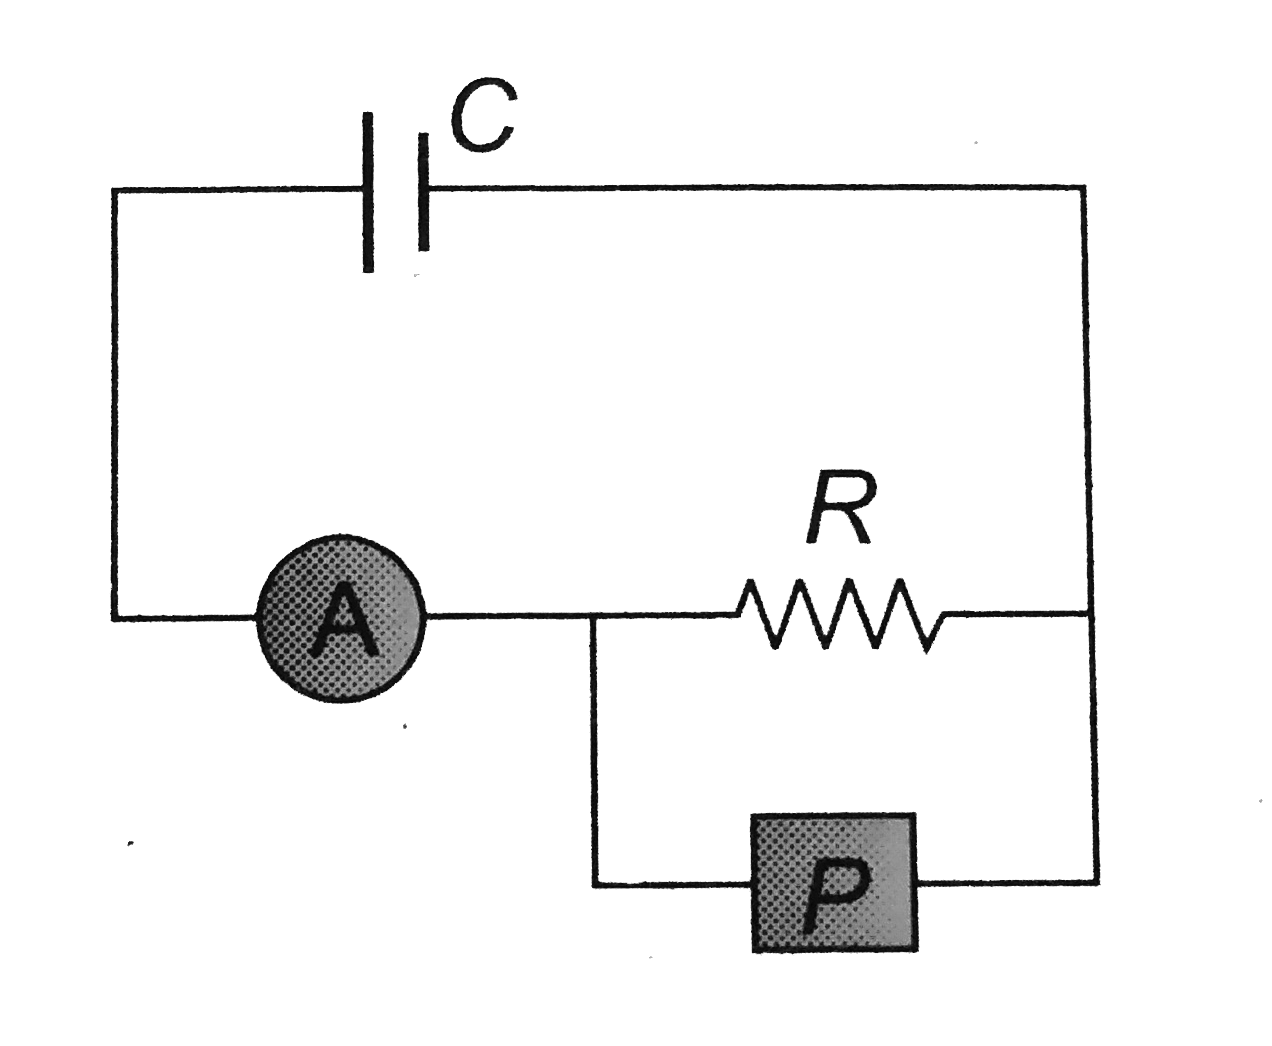 An ammeter A of finite resistance, and a resistor R are joined in series to an ideal cell C. A potentiometer P is joined in parallel to R. The ammeter reading is I(0) and the potentiometer reading is V(0). P is now replaced by a voltmeter of finite resistance. The ammeter reading now is I and the voltmeter reading is V.